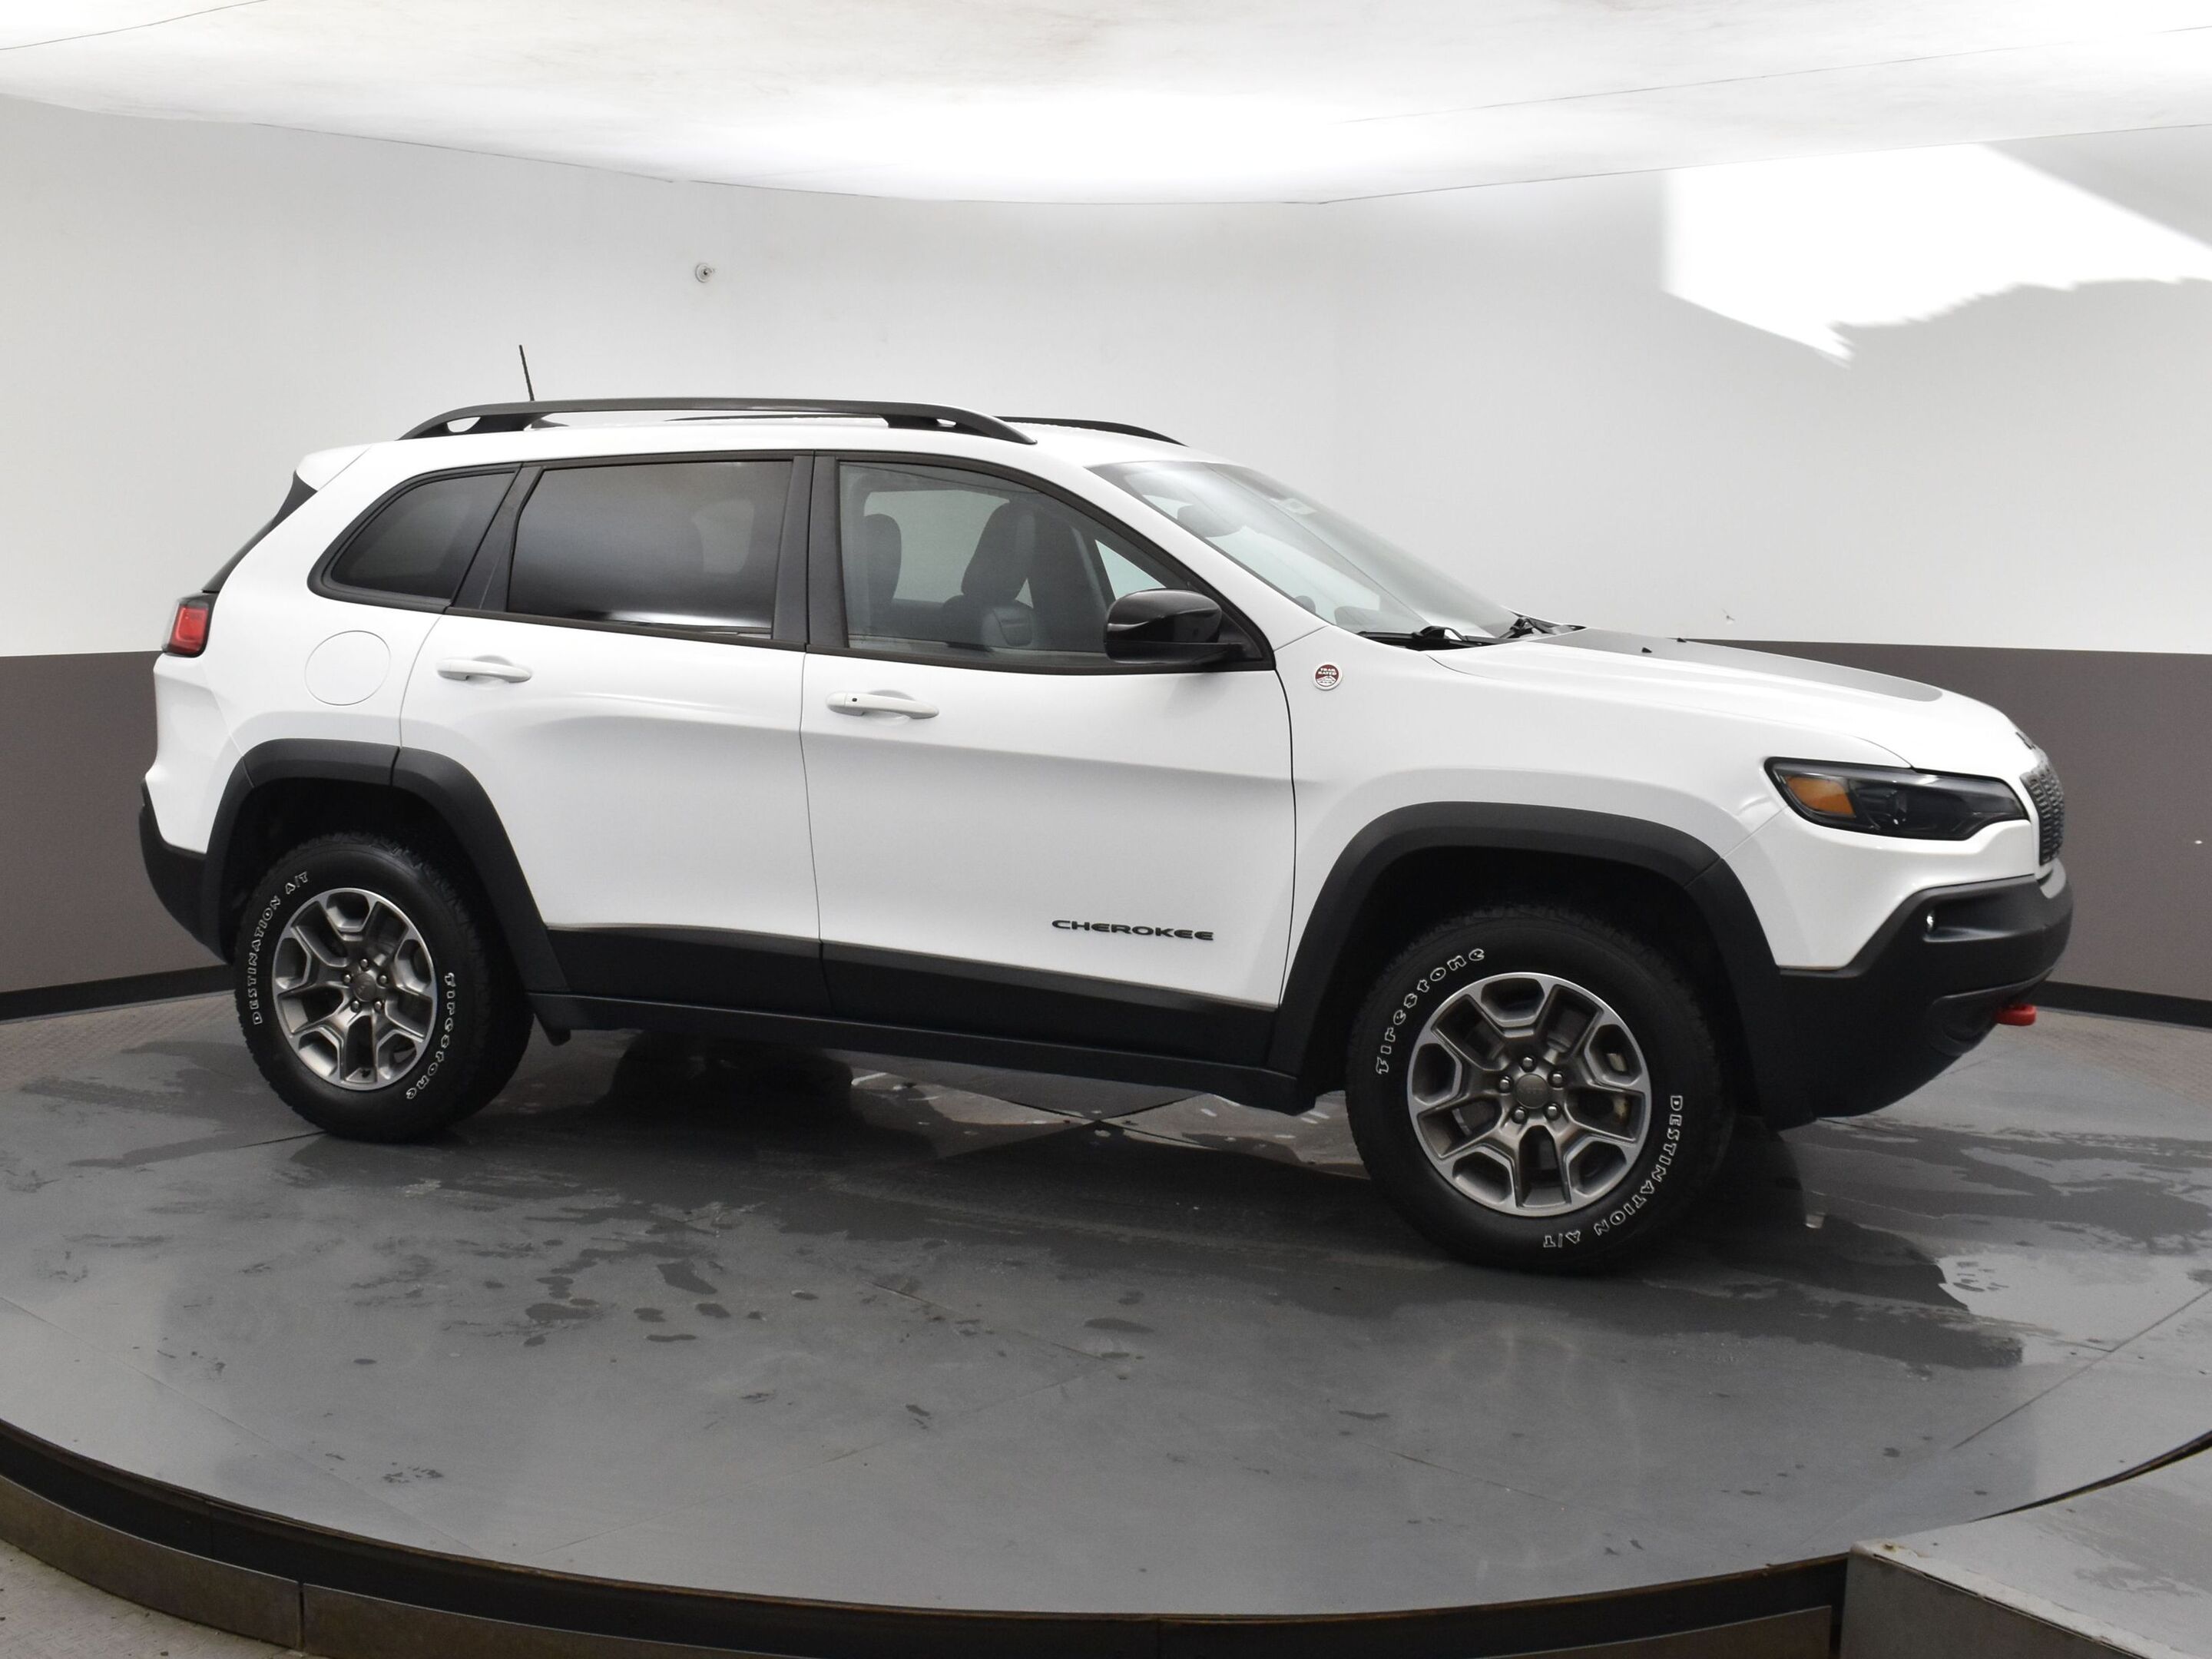 2022 Jeep Cherokee TRAIL RATED 4x4, LEATHER INTERIOR, HEATED STEERING